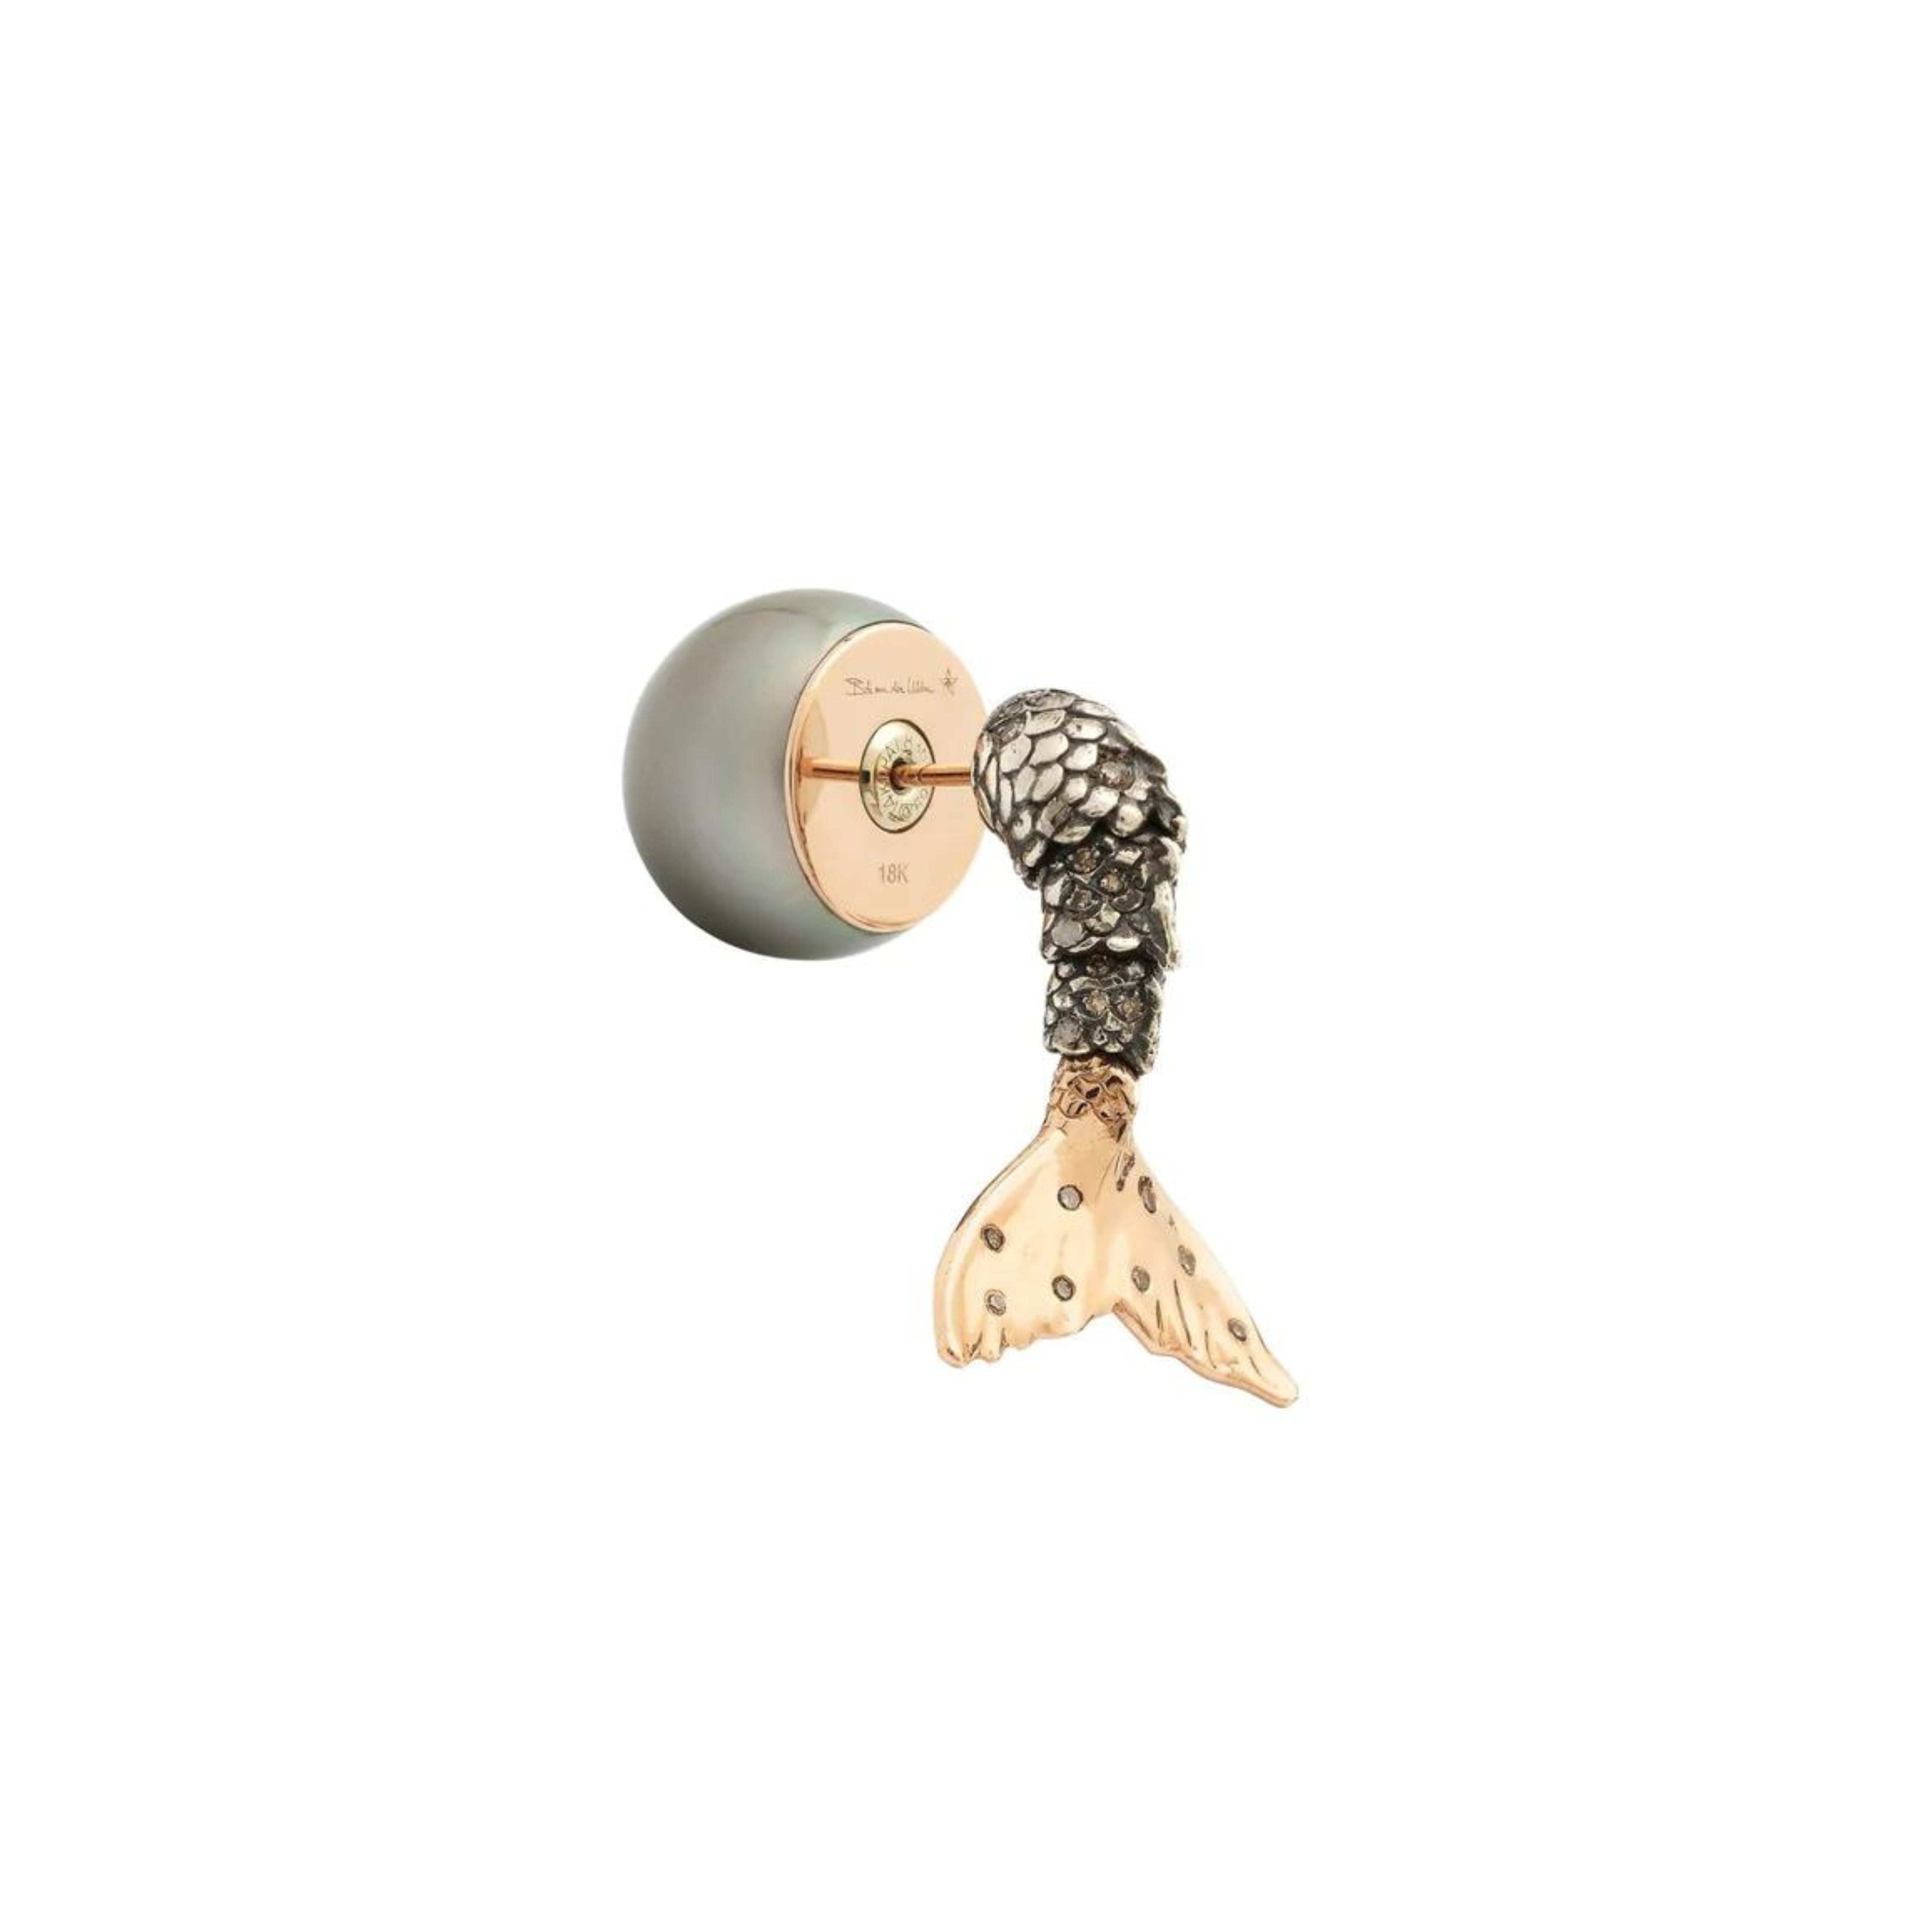 Bibi van der Velden Mermaid Pearl Earring. Made in 18K rose gold and sterling silver with a deep blue pearl and brown diamonds. Featuring a moving mermaid's tail with moving scales and gold fin. Shown from the side.